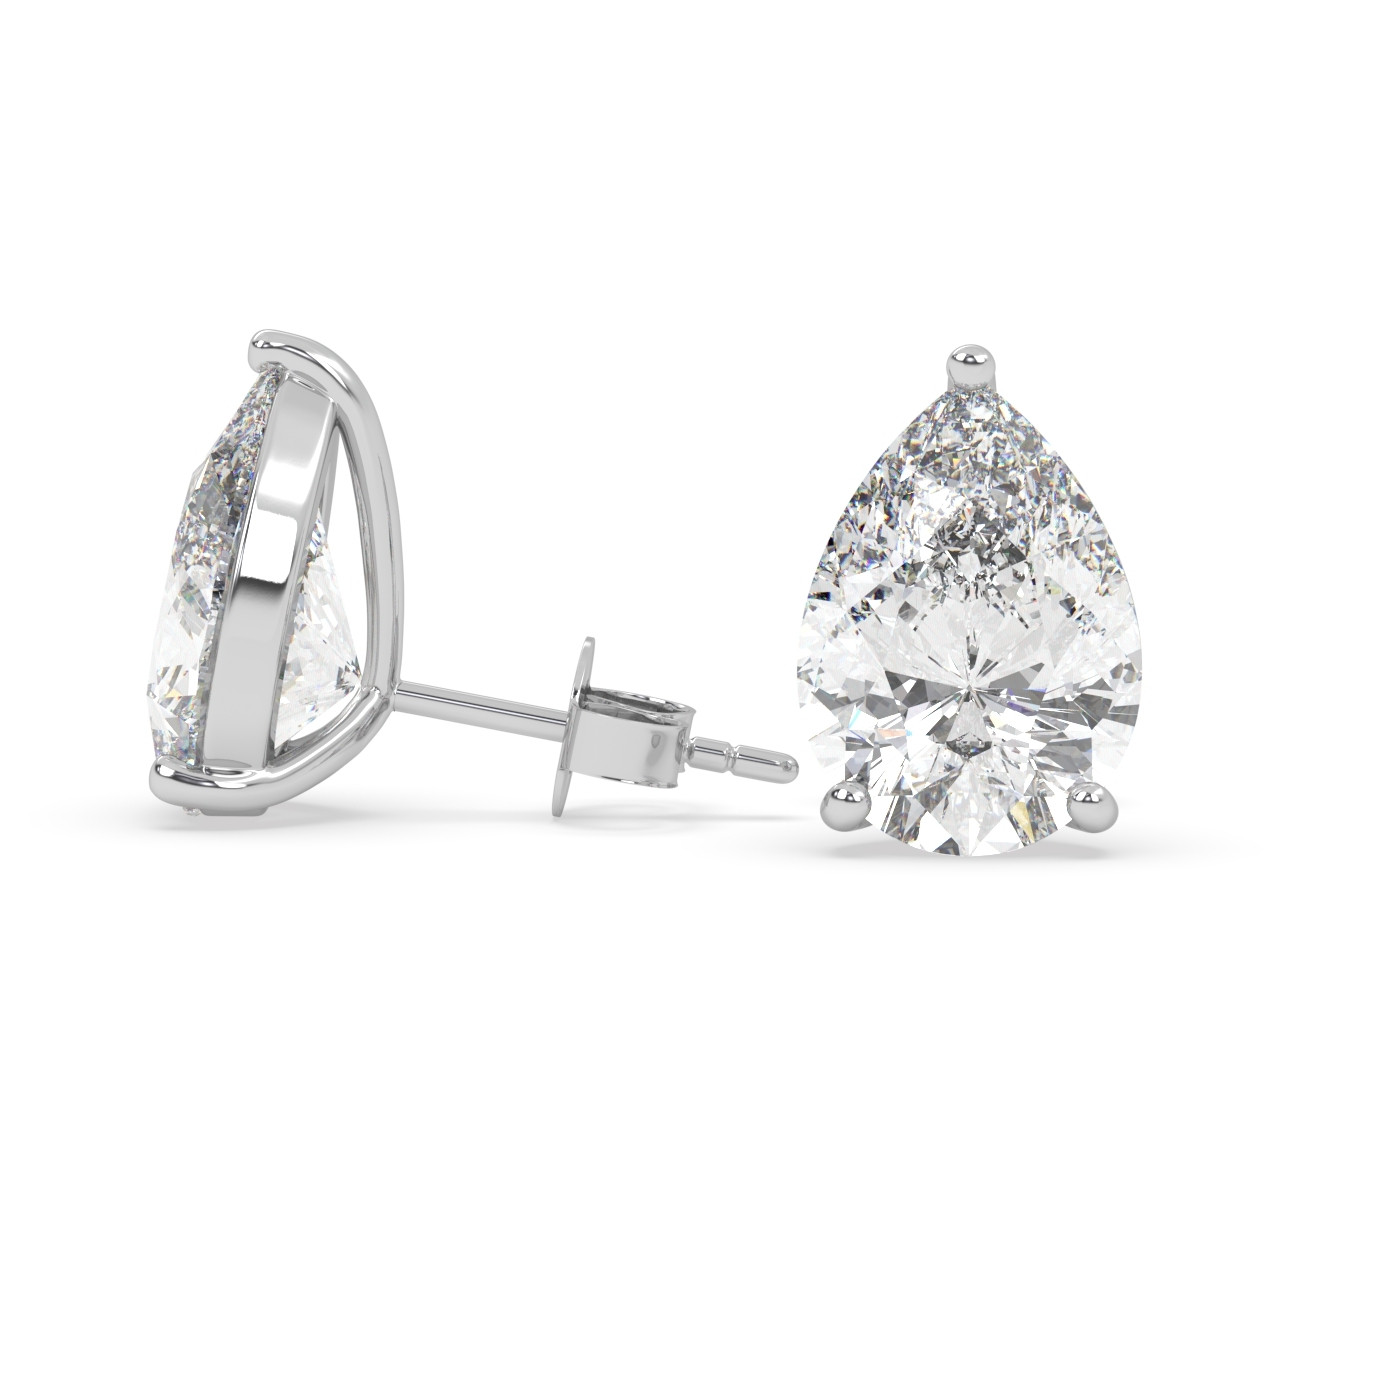 18K WHITE GOLD Pear Stud Earrings with butterfly back